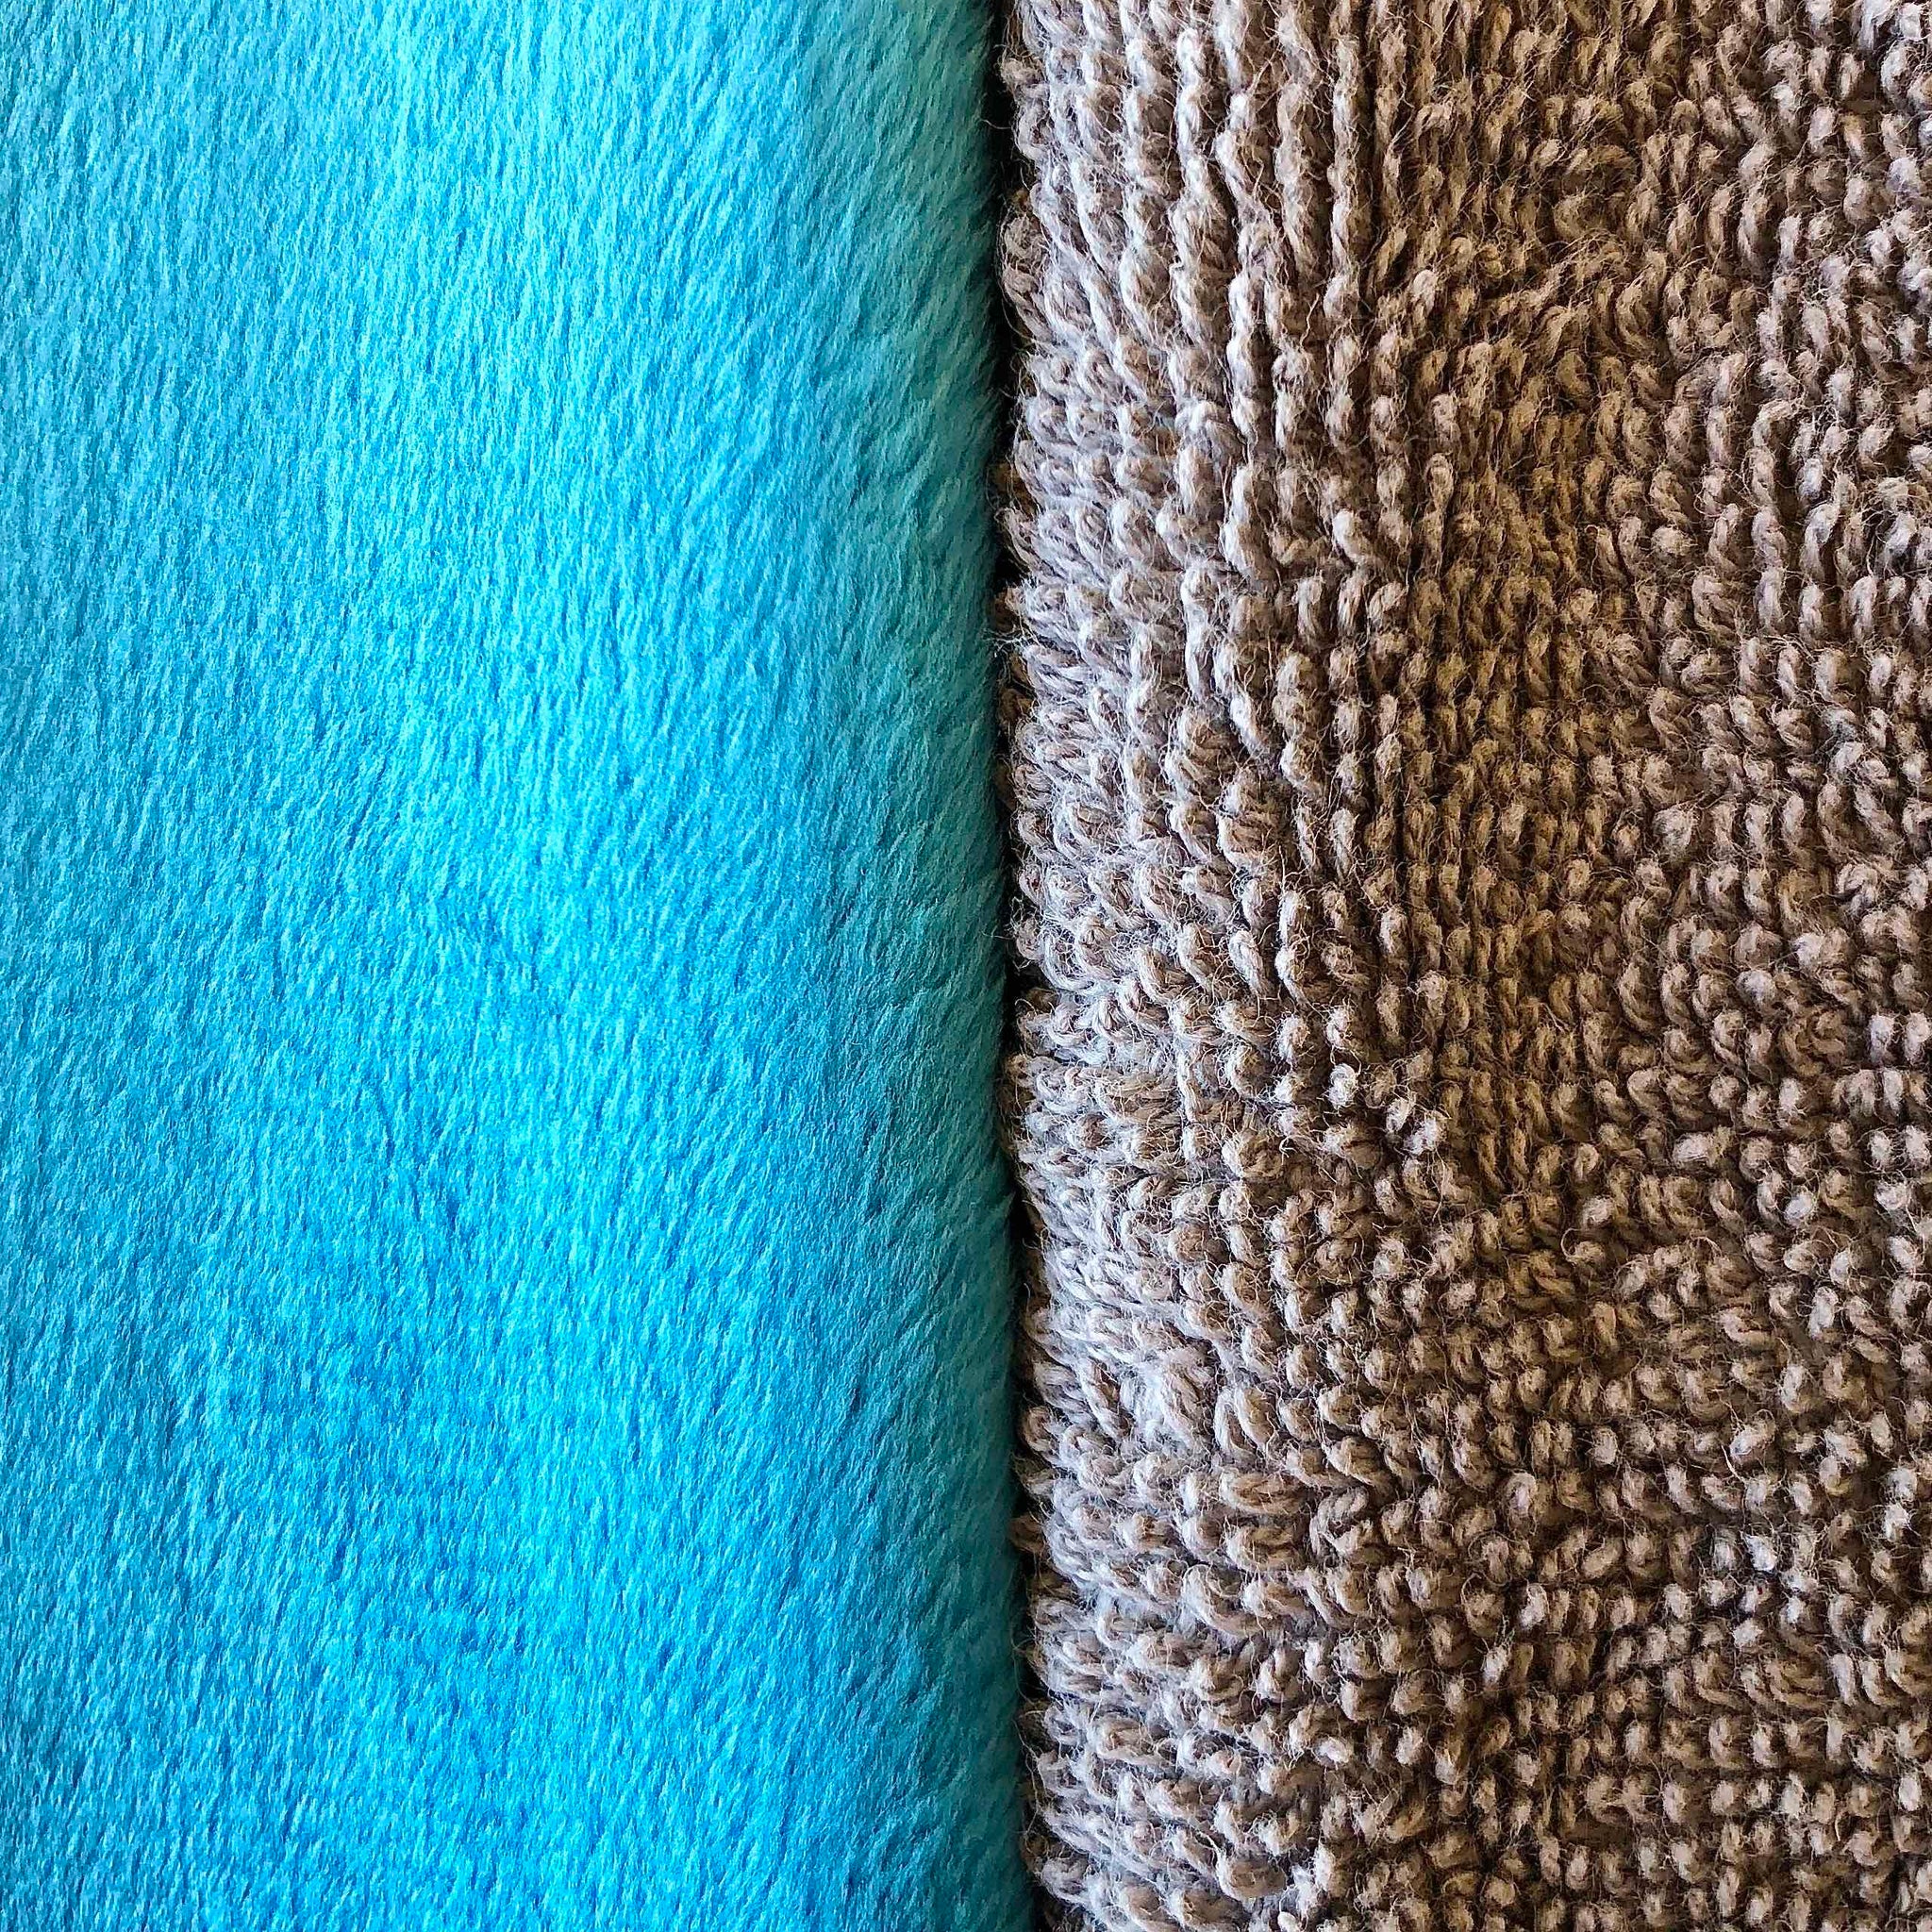 The Mitty Fabric vs. Terrycloth